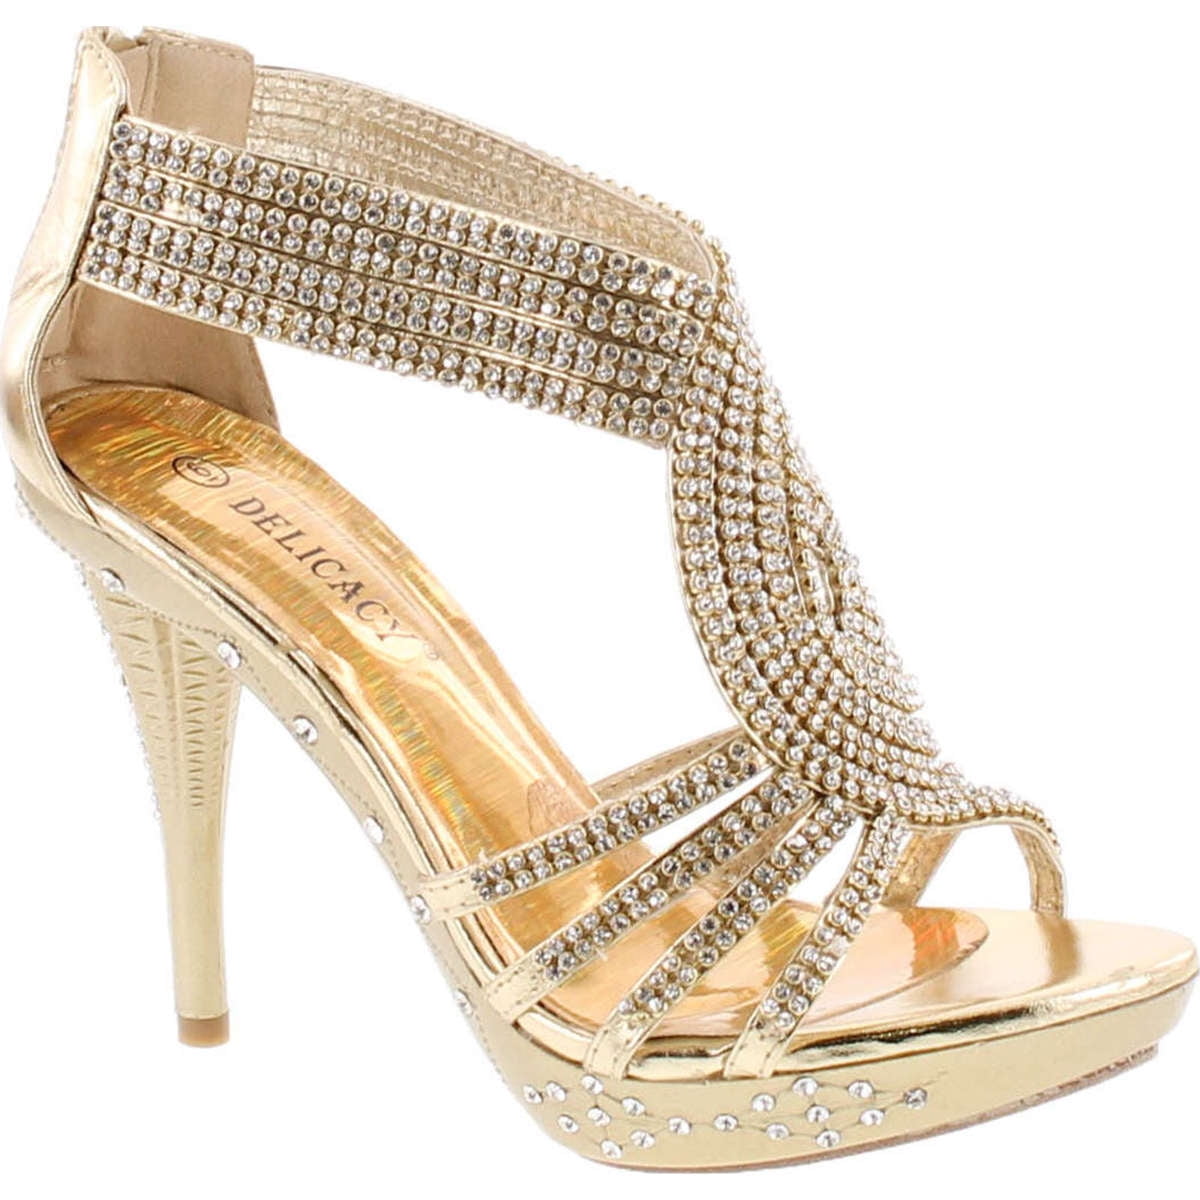 Delicacy 07 Womens Rhinestone Event Dress Sandals Gold, Gold, 9 ...